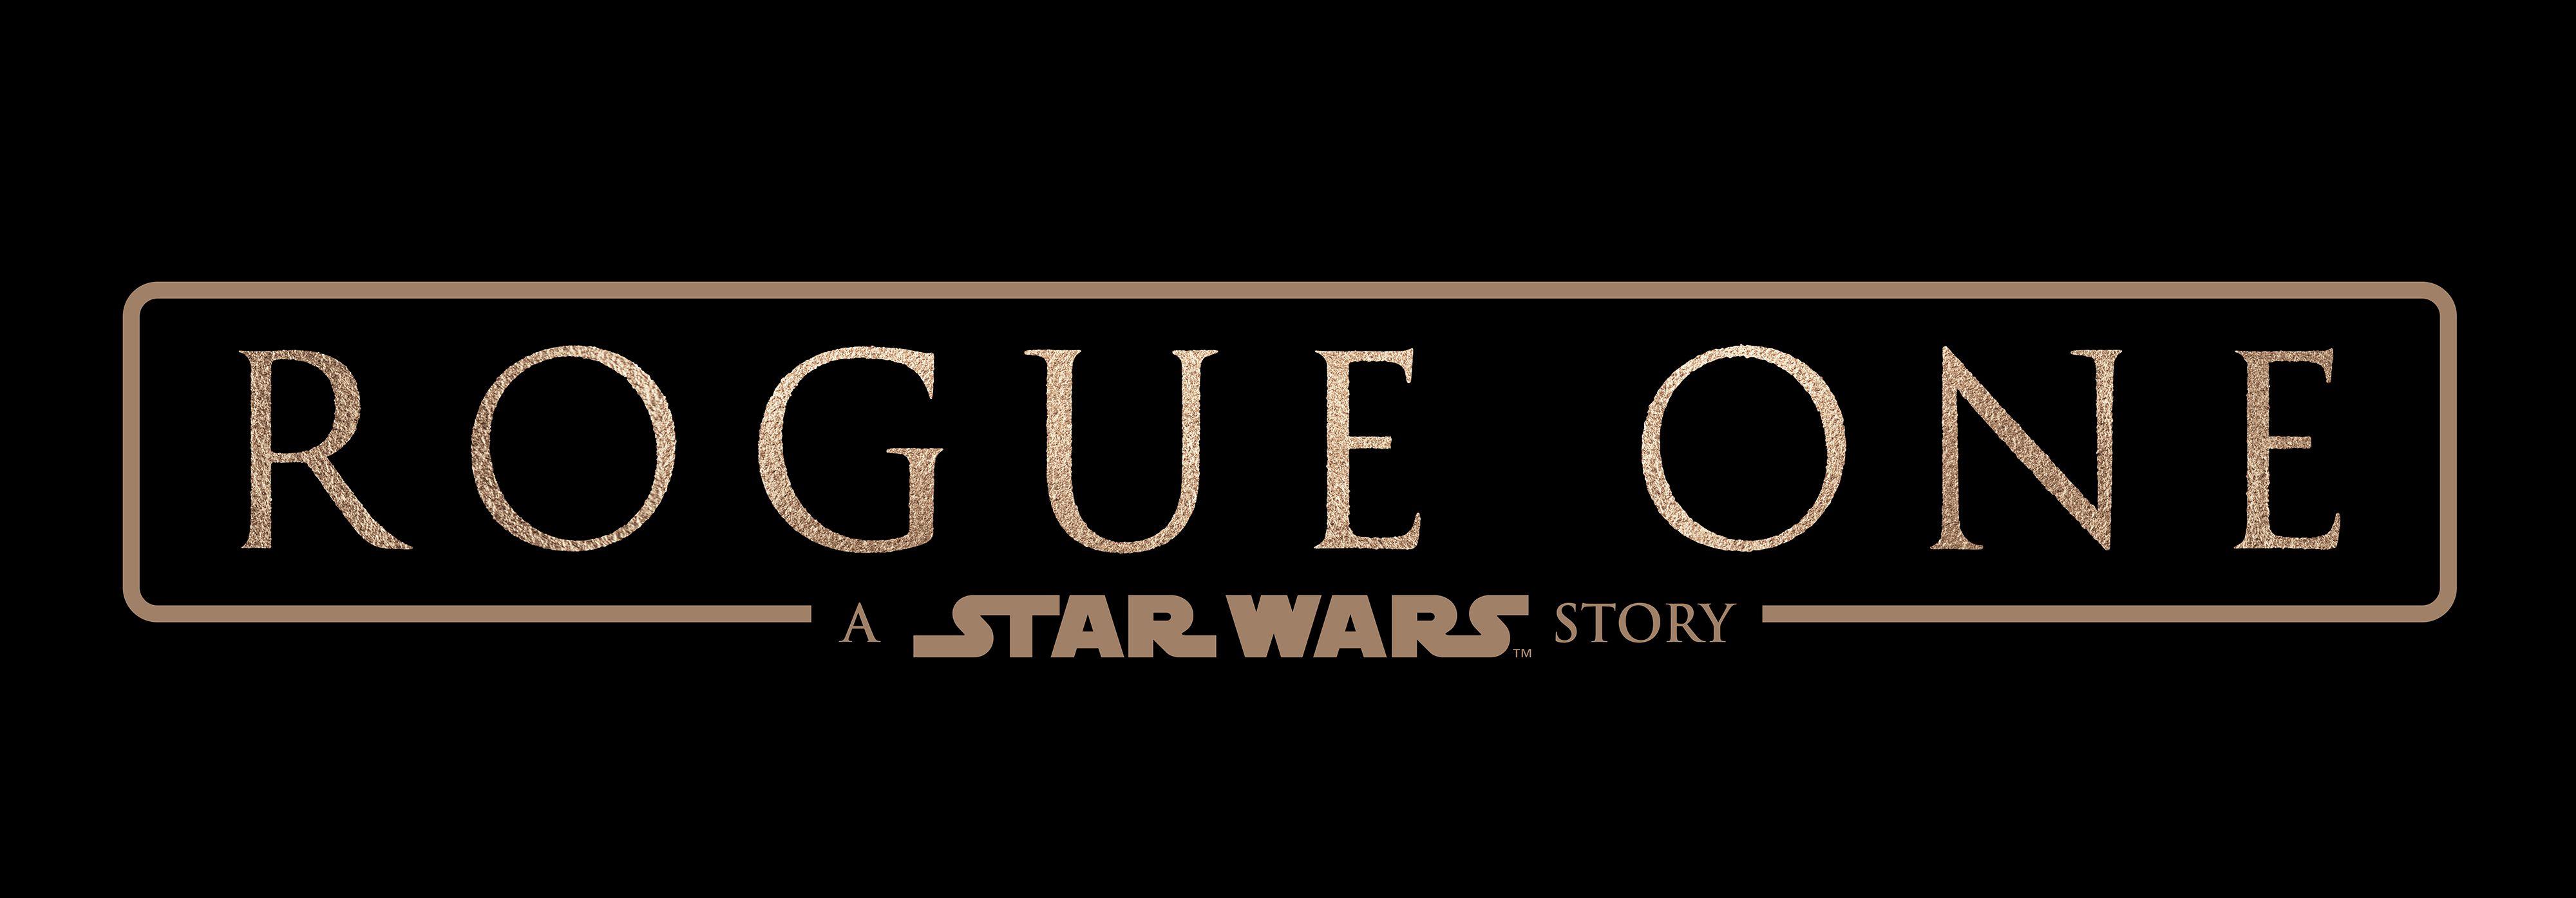 Movie Title Logo - Disney Reveals Movie Logos for Major Upcoming Releases | Collider